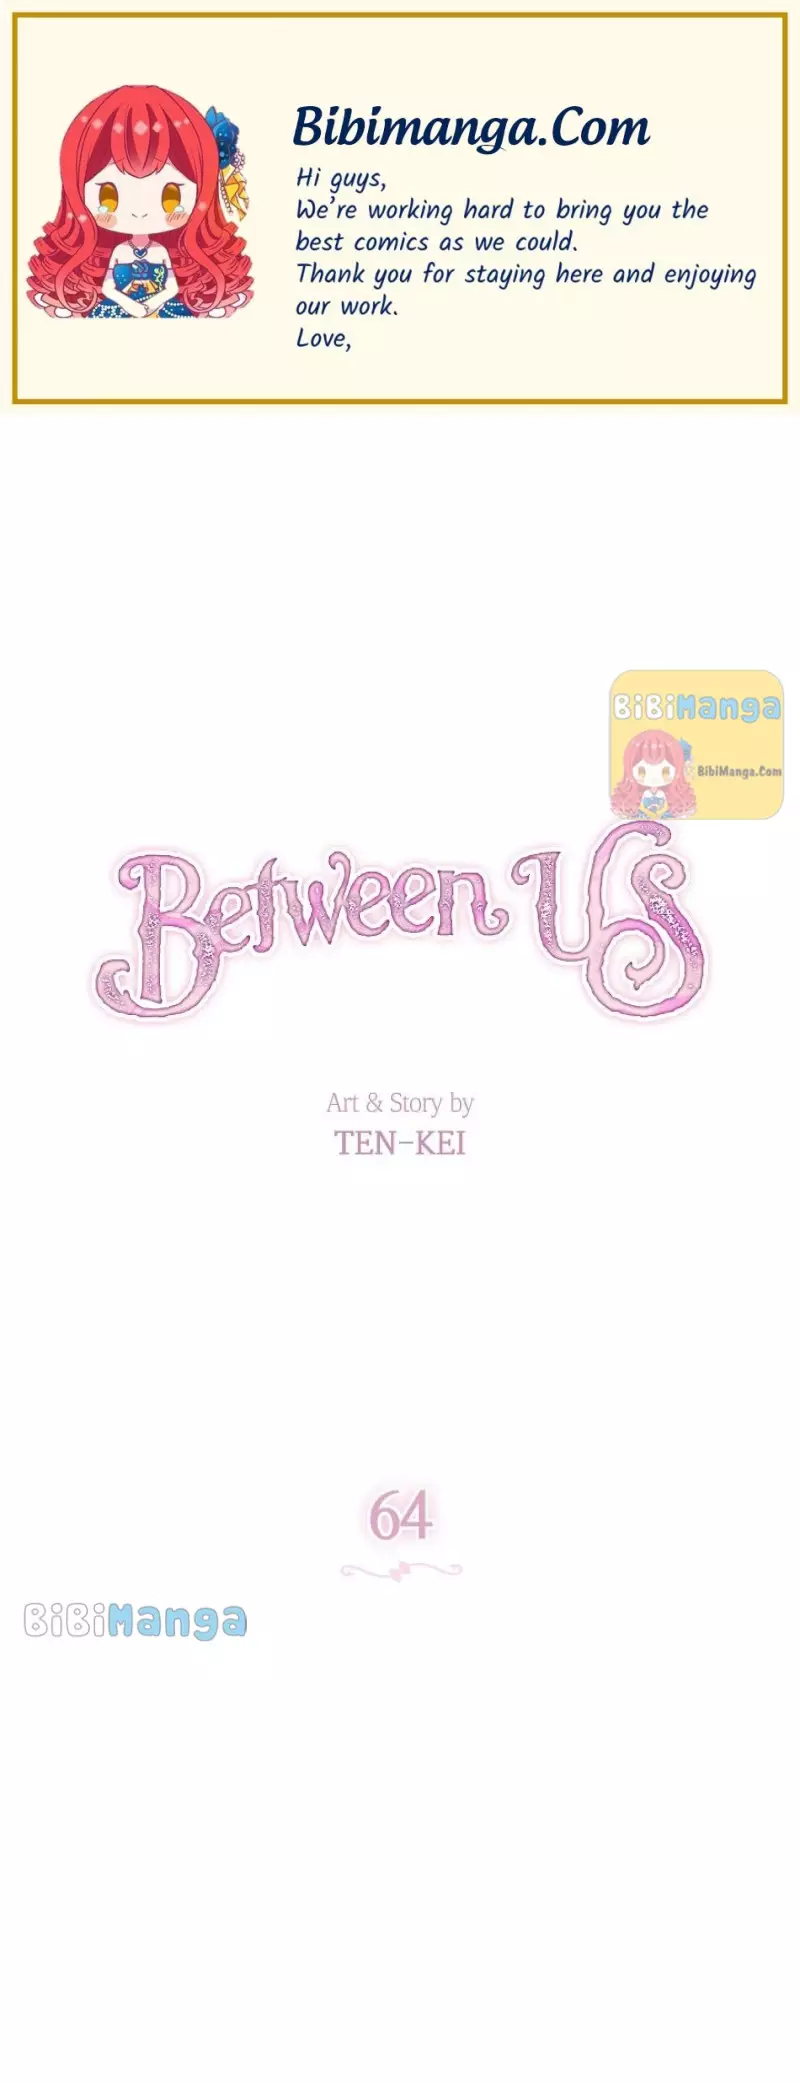 Between Two Lips - 64 page 1-f4d7b2f2